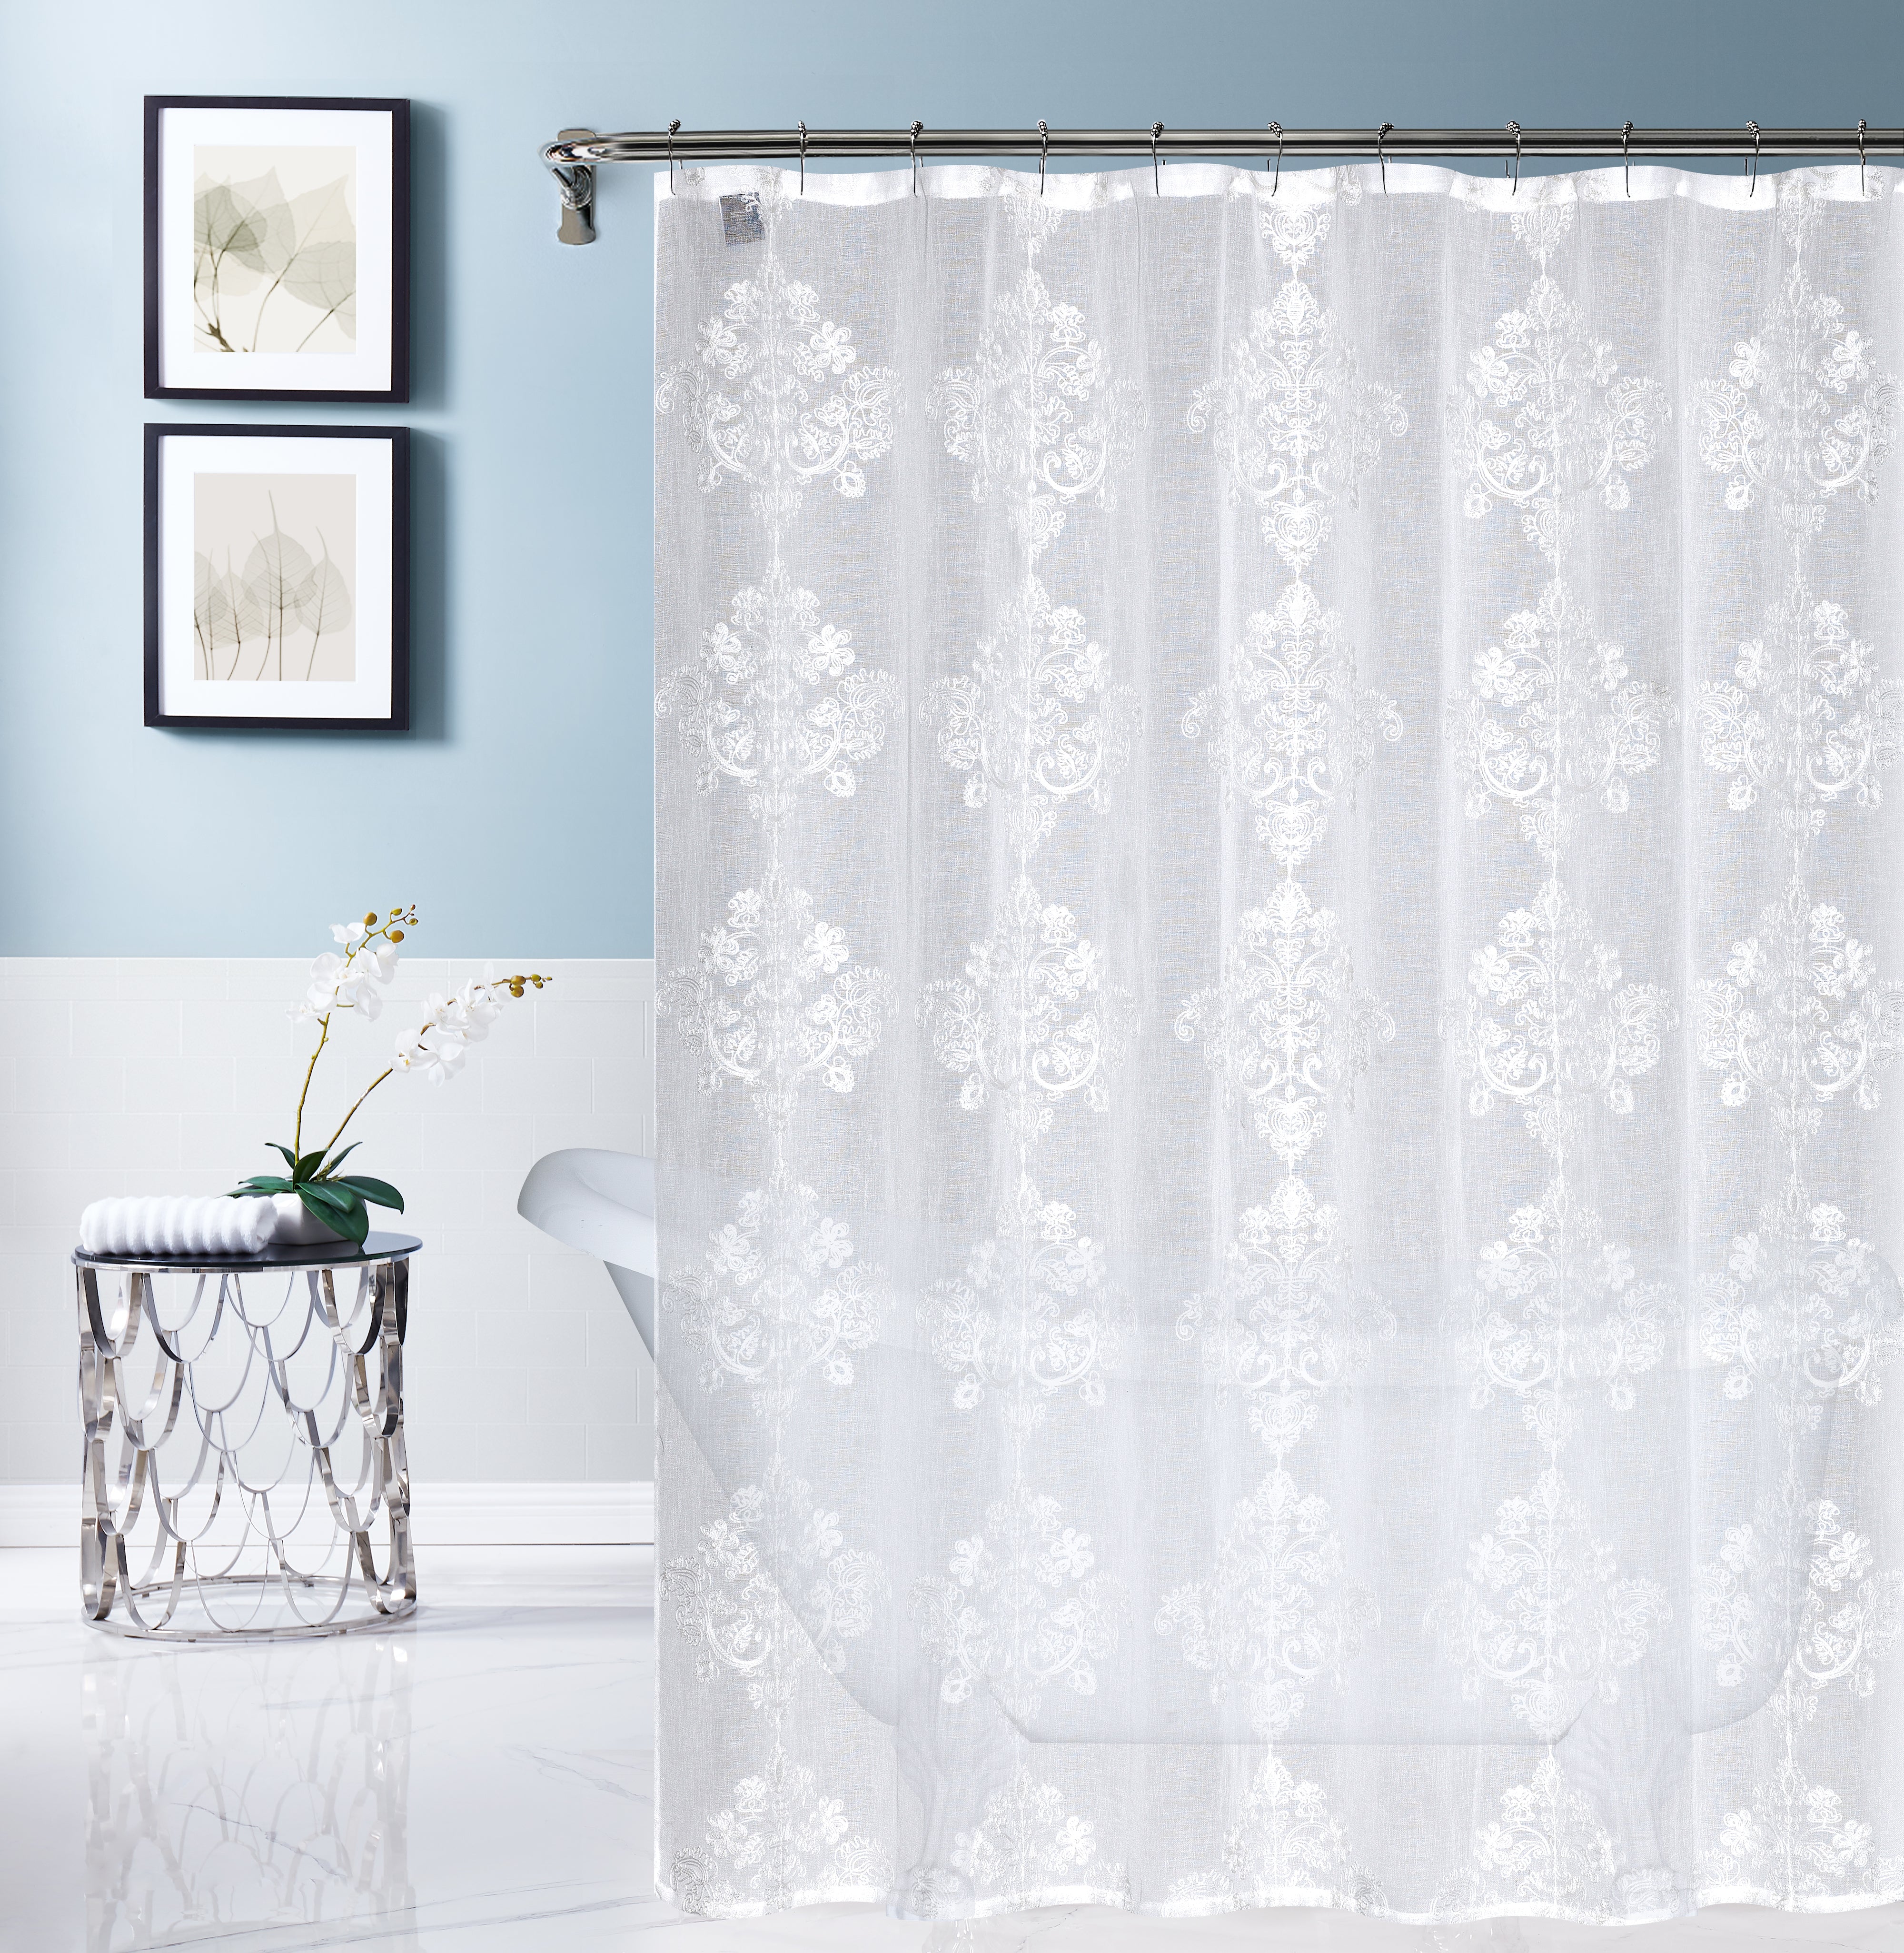 Dainty Home Amelie Modern 3D Damask Textured Embroidered Designed Linen-Look Fabric Shower Curtain